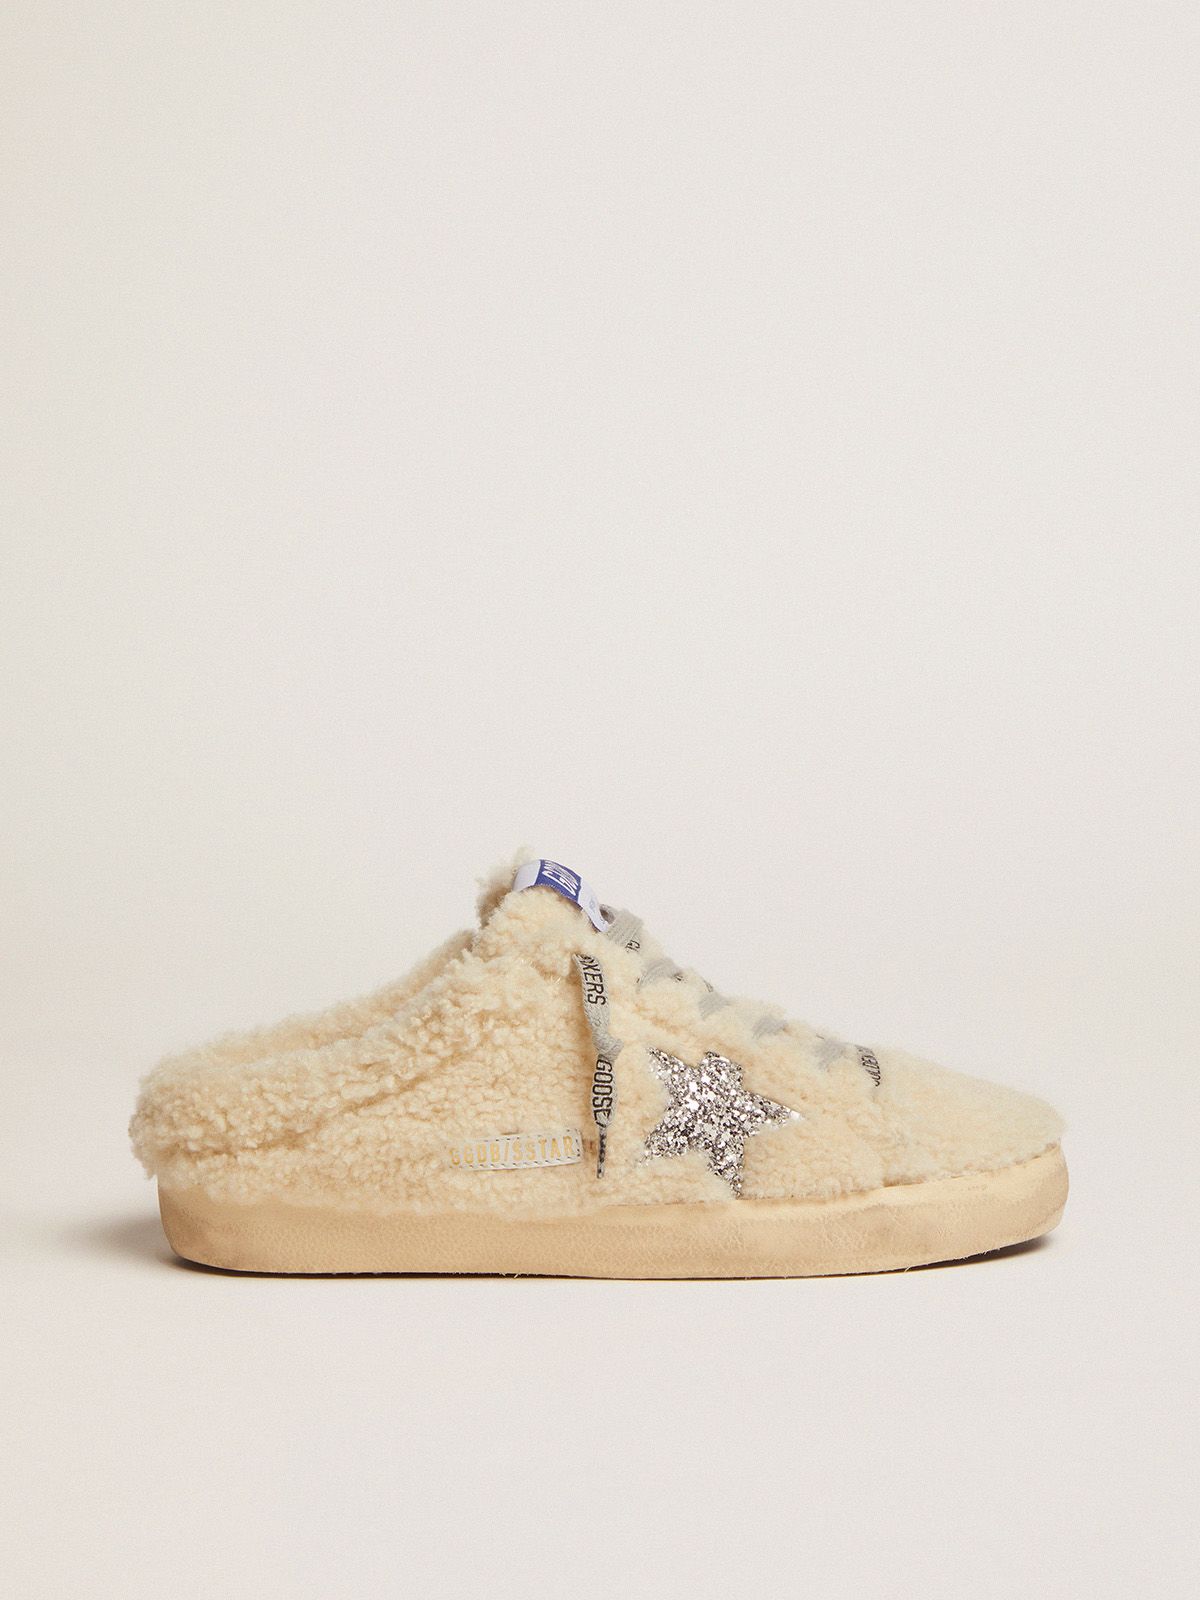 Golden Goose Stardan Super-Star Sabots in natural white shearling with silver glitter star